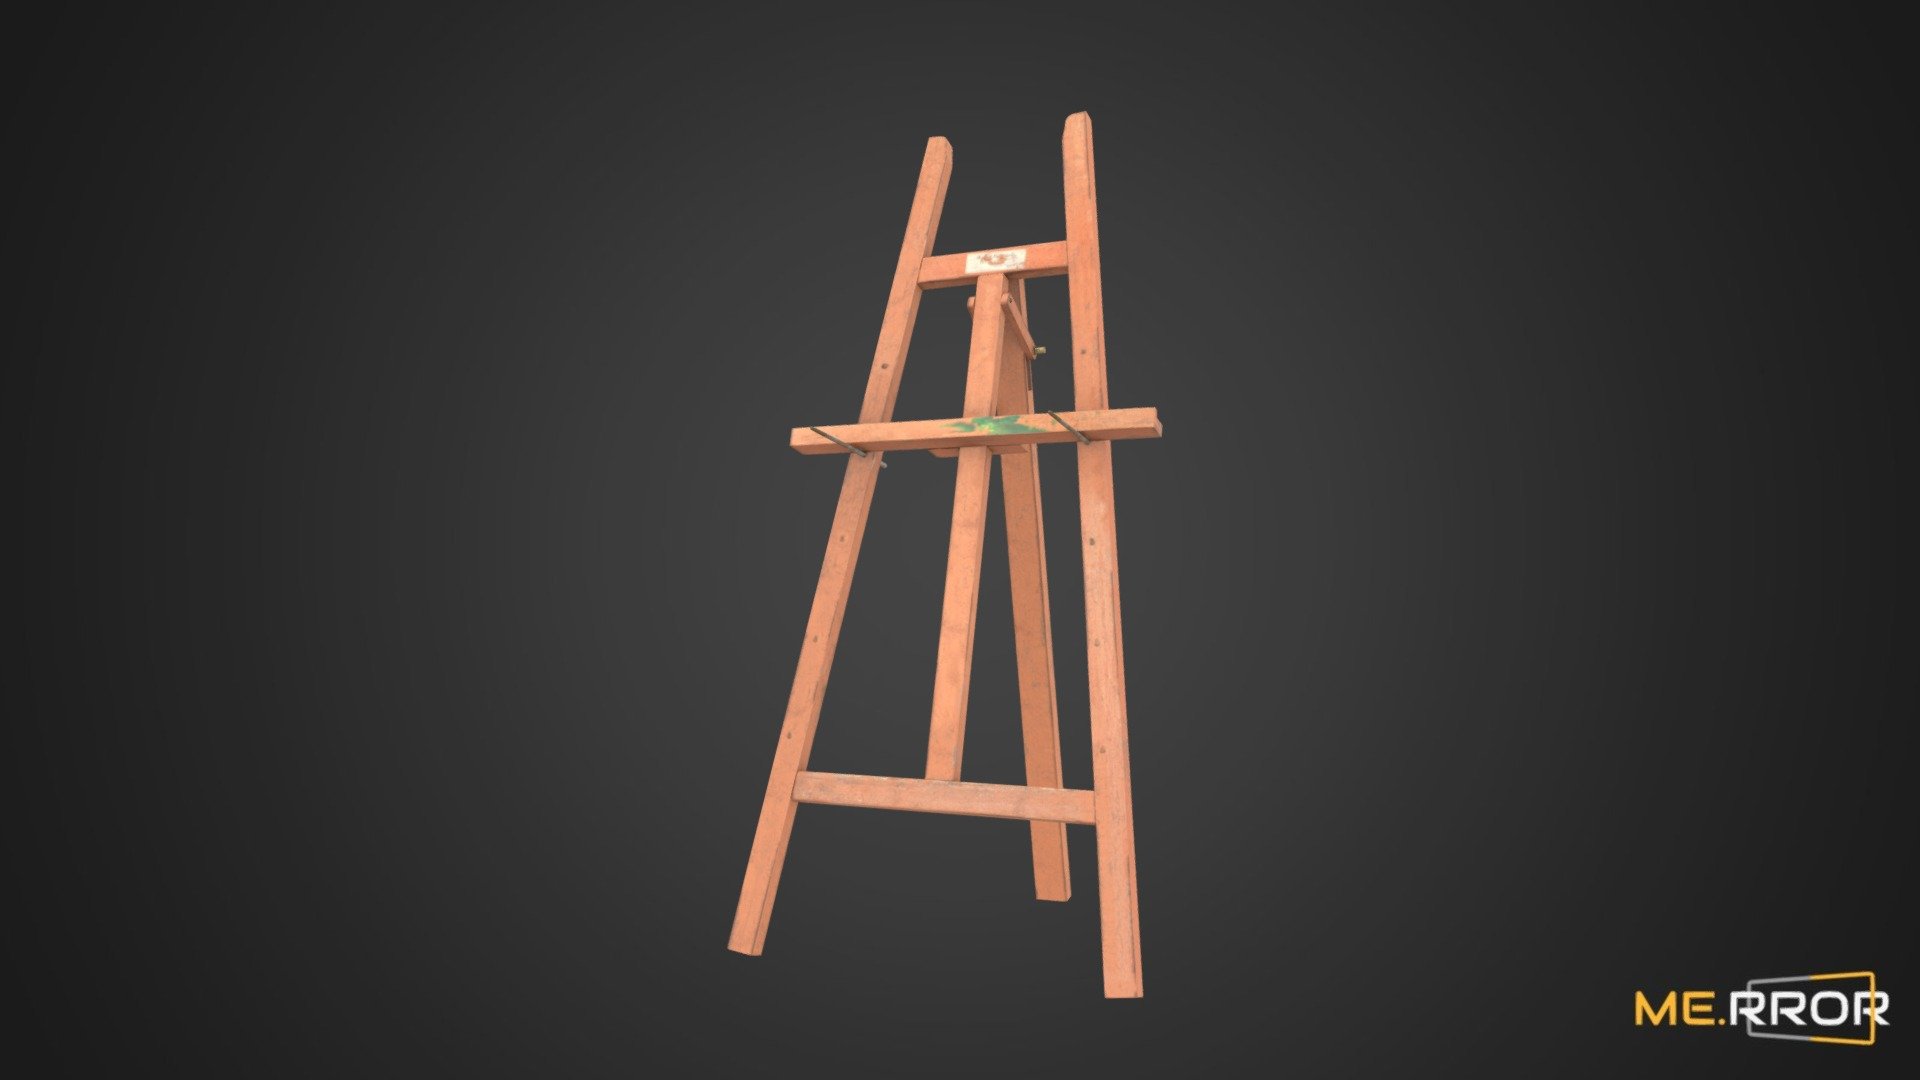 MERROR is a 3D Content PLATFORM which introduces various Asian assets to the 3D world


3DScanning #Photogrametry #ME.RROR - [Game-Ready] Wood Easel - Buy Royalty Free 3D model by ME.RROR (@merror) 3d model